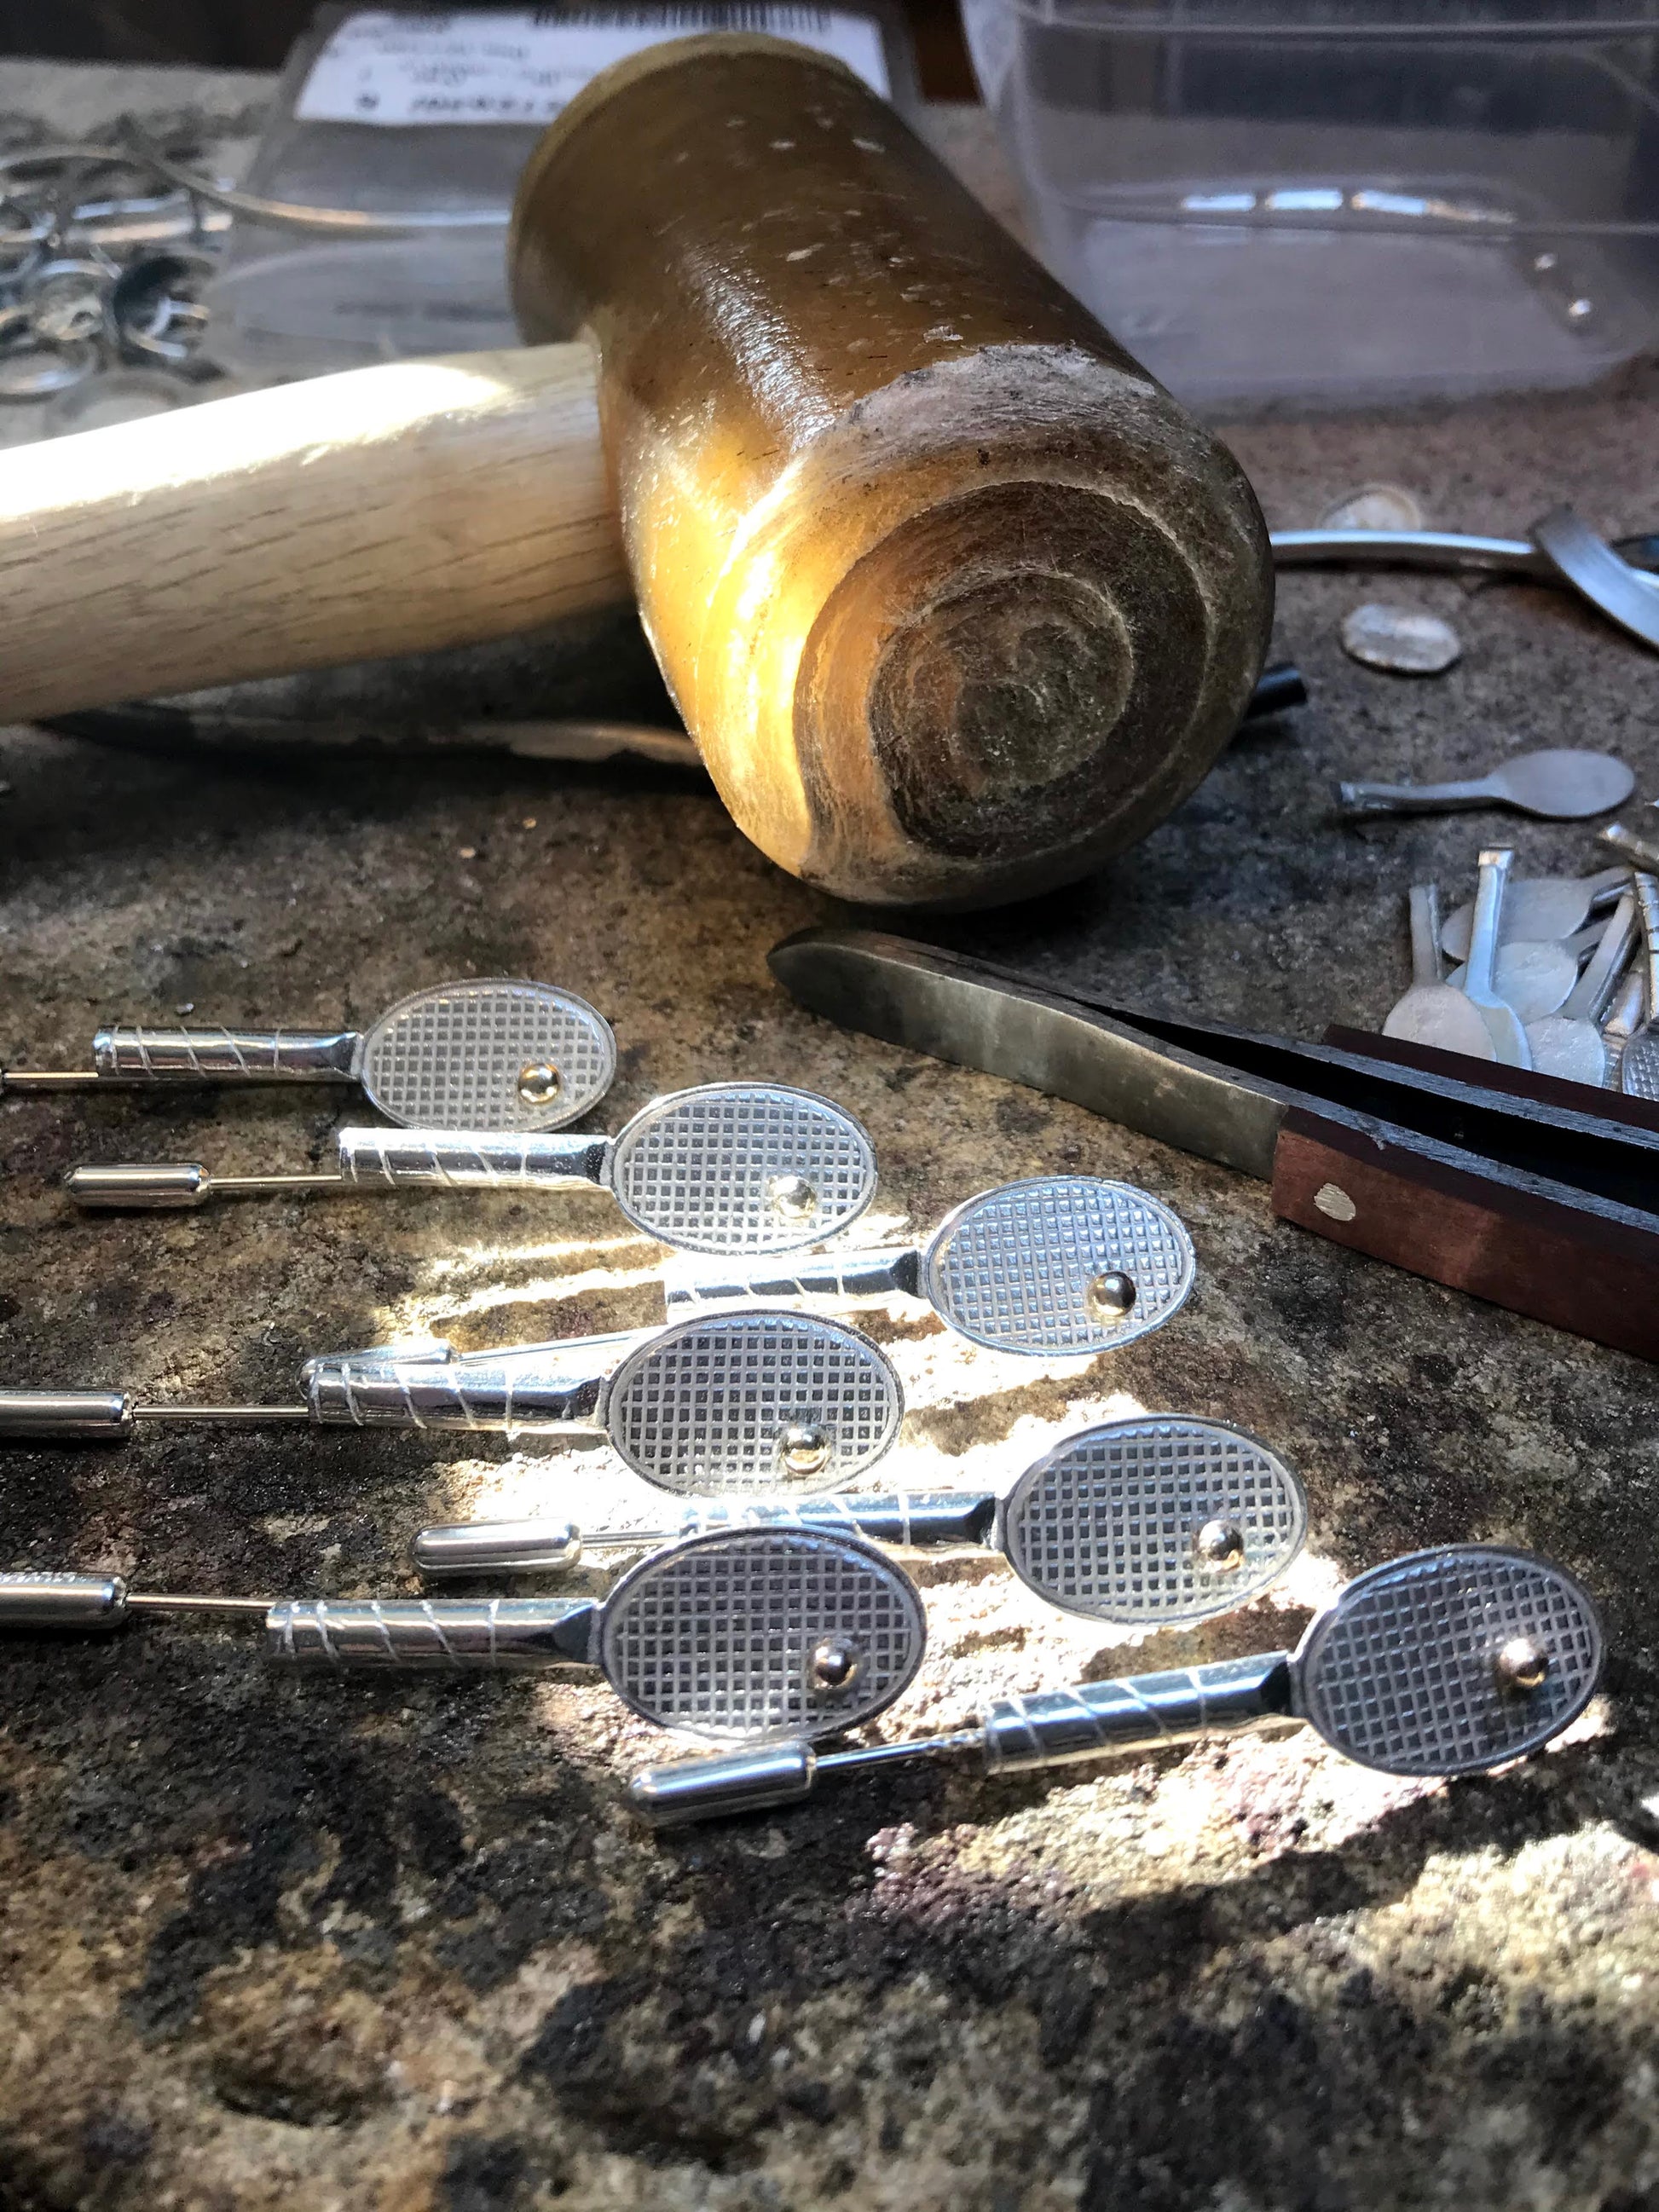 seven sterling silver tennis racket shaped broach/stick pins handmade with 9ct gold ball. Pictured with traditional rawhide mallet